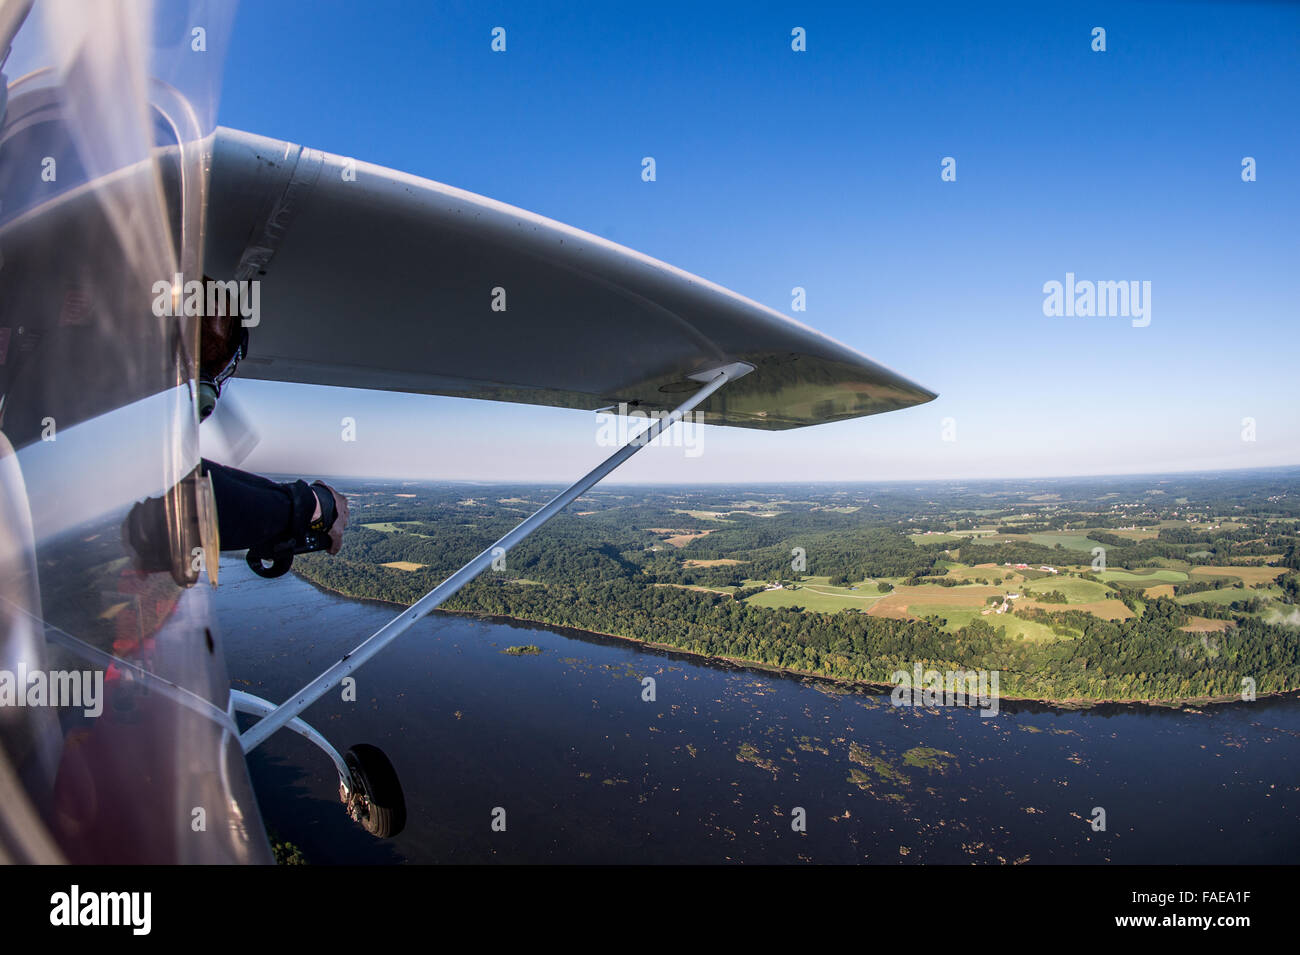 Photographer taking pictures from the side of a plane Stock Photo